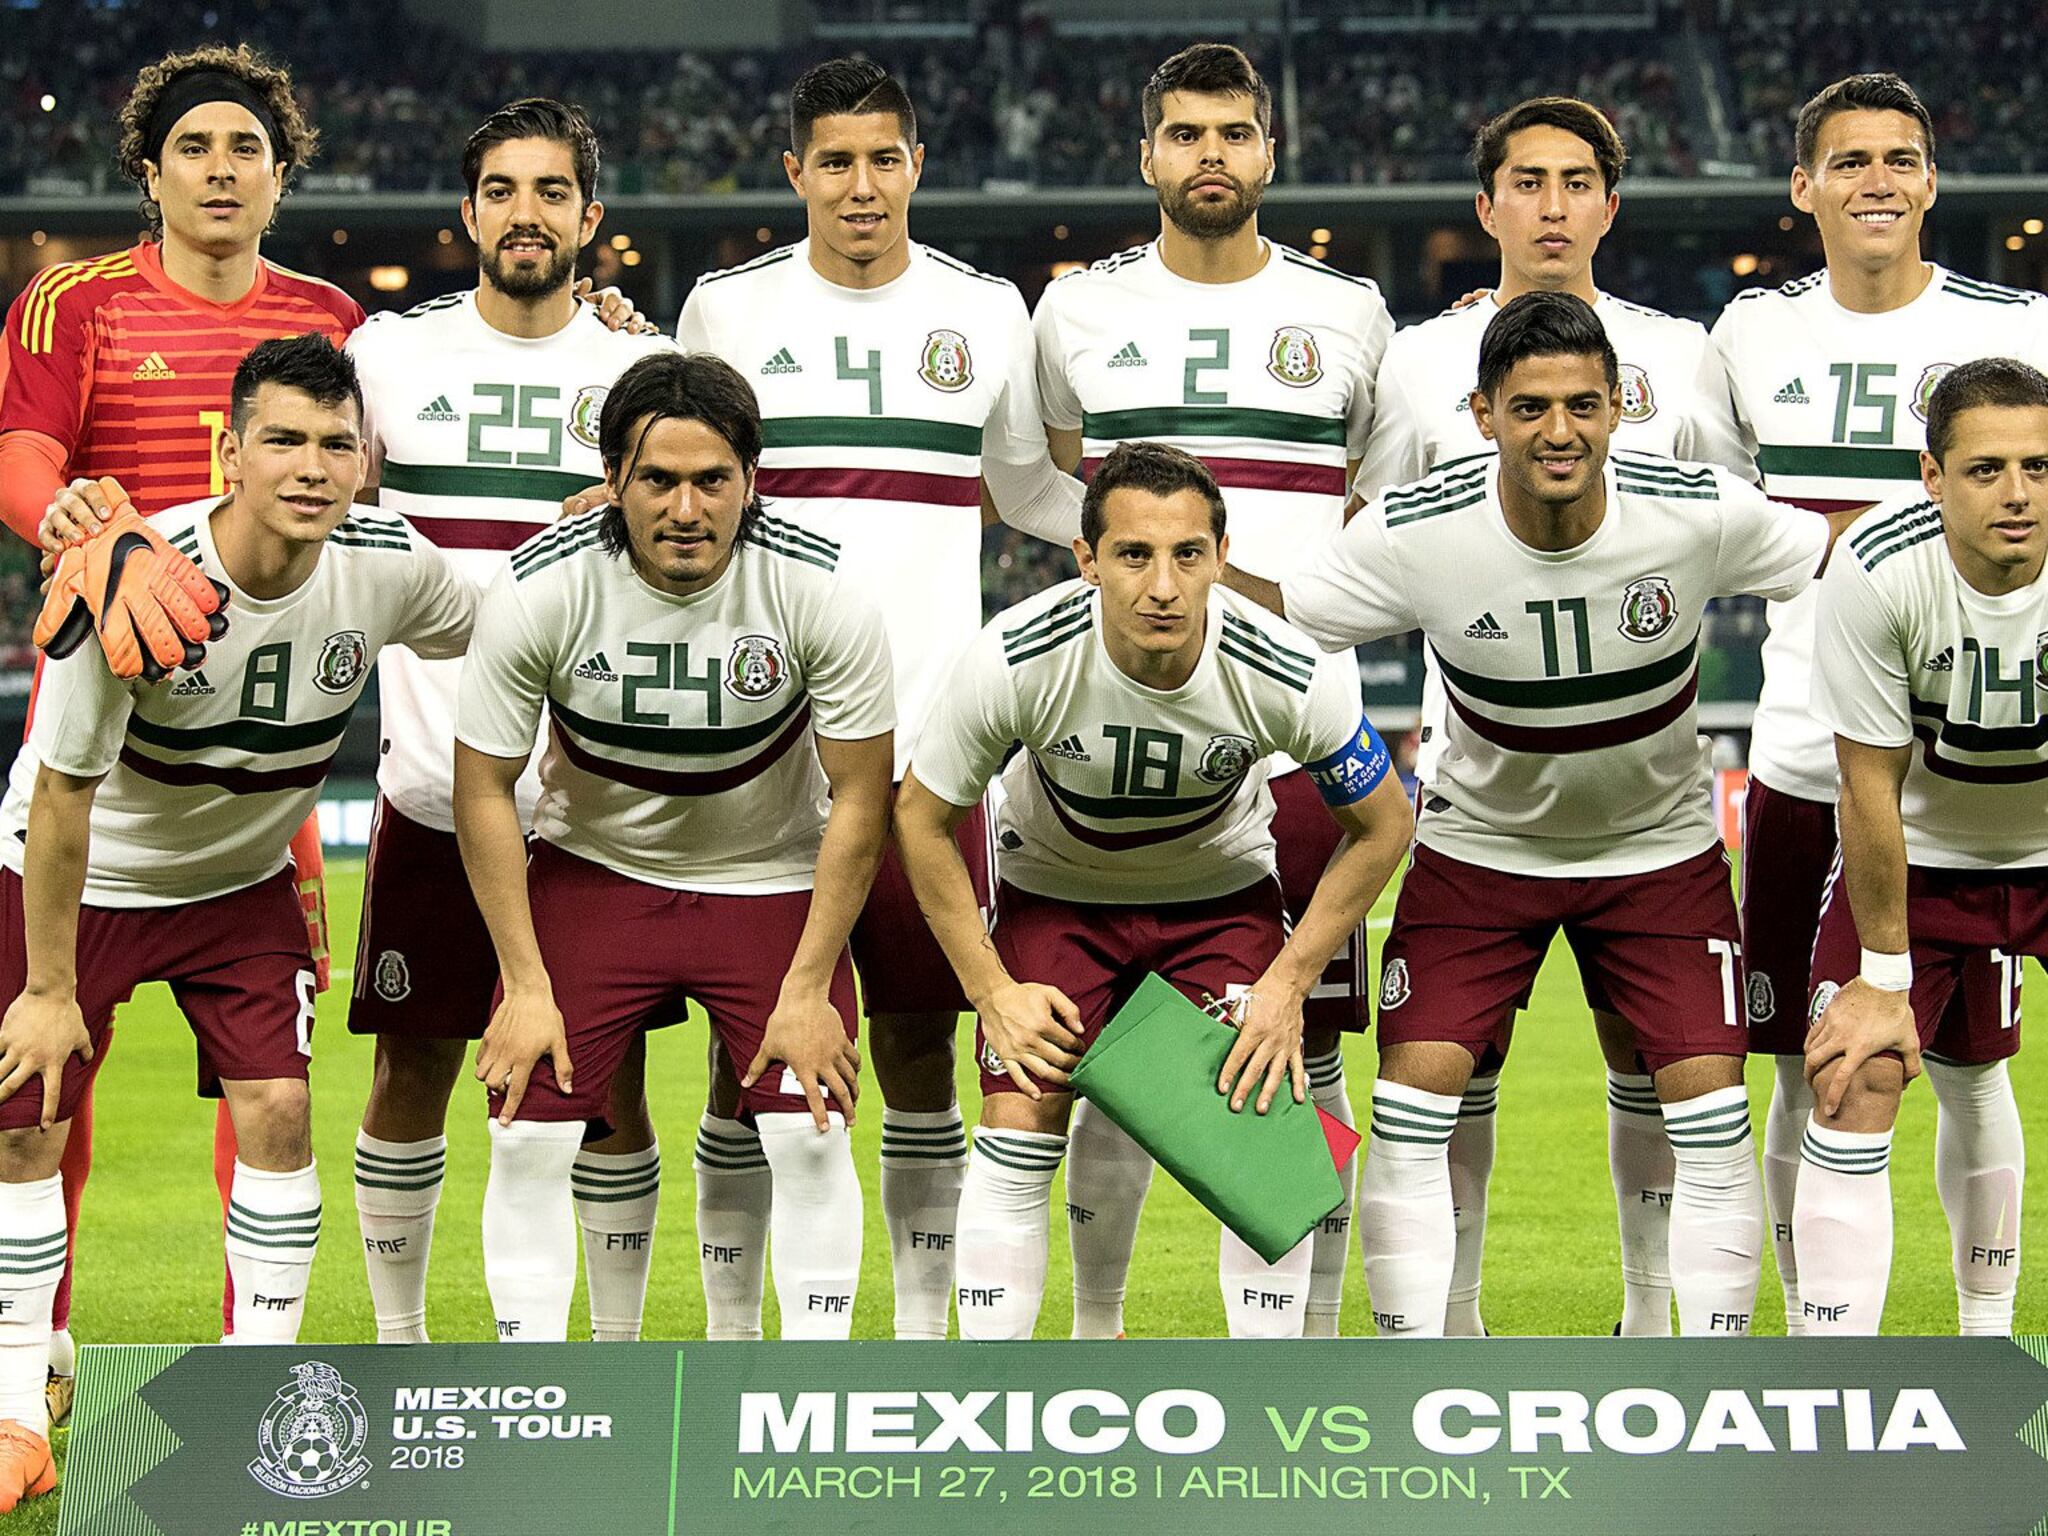 This's the new jersey of Mexico: photos and how much it costs